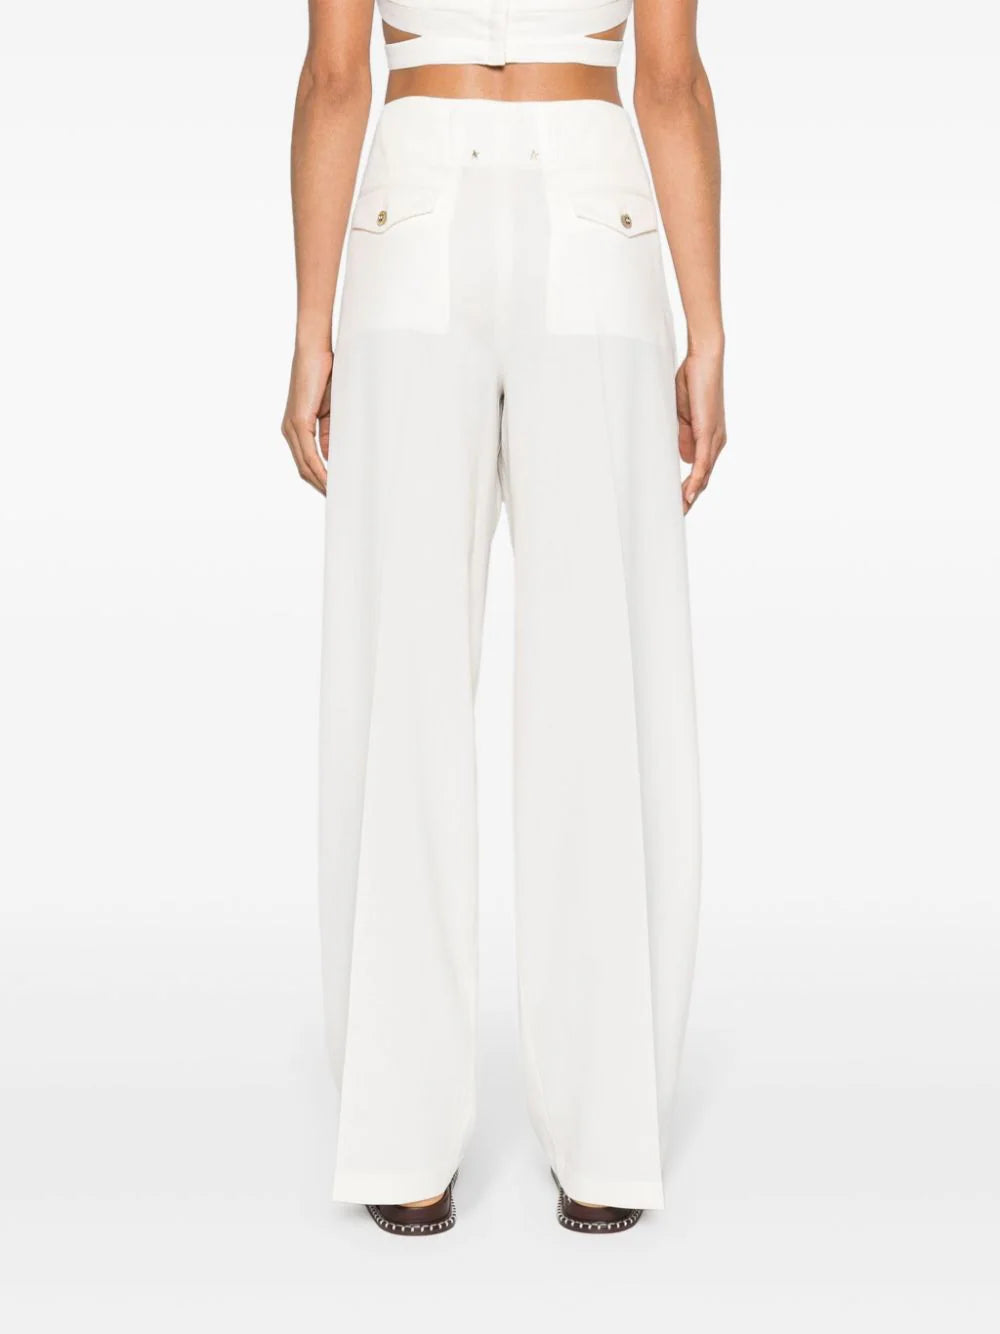 Journey Flavia Wide Leg Pant in Arctic Wolf